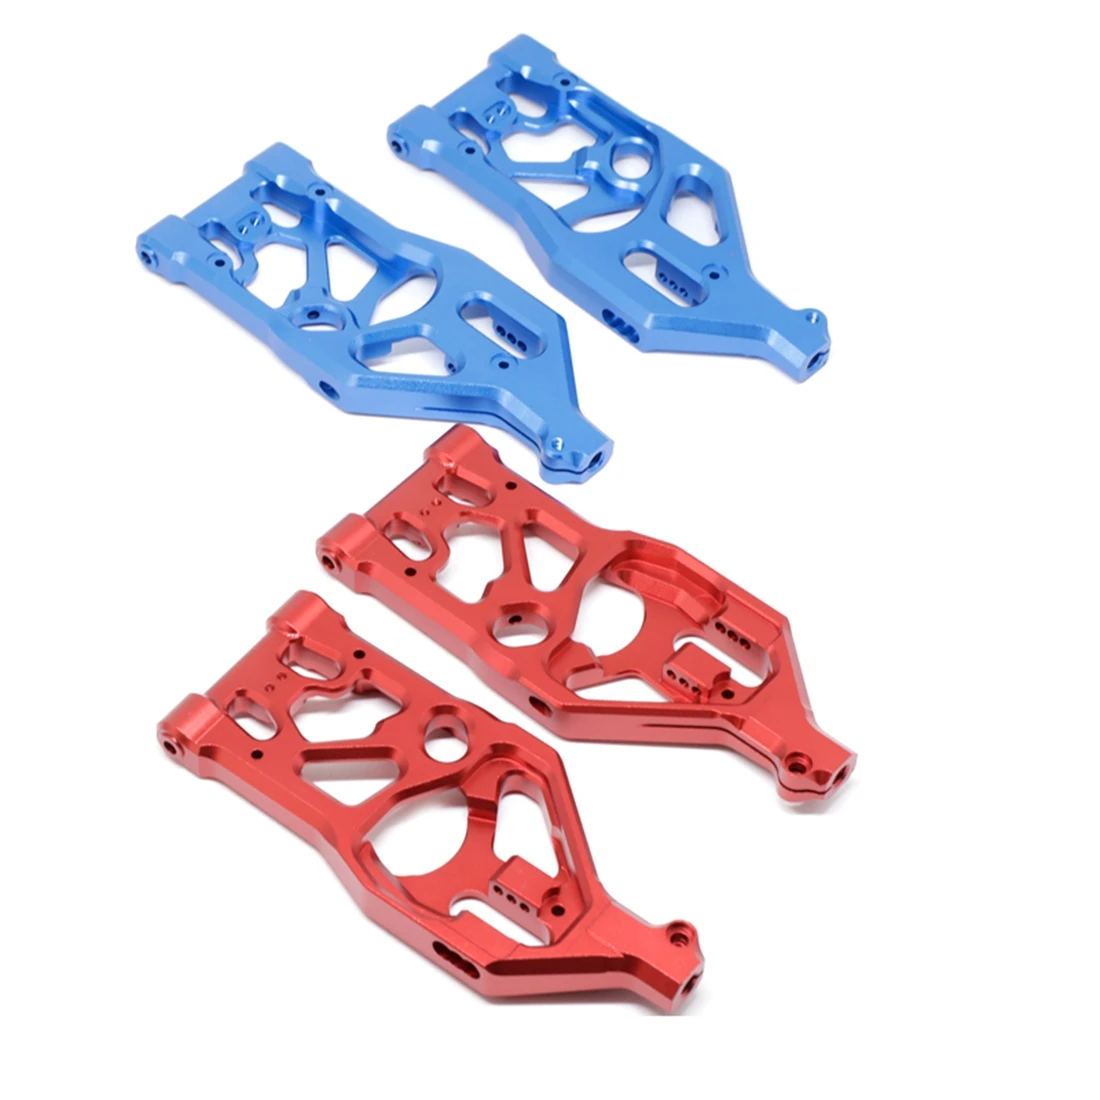 

Metal Front Lower Suspension Arm for Arrma 1/5 KRATON 8S BLX Outcast 8S BLX RC Car Upgrade Parts,Red